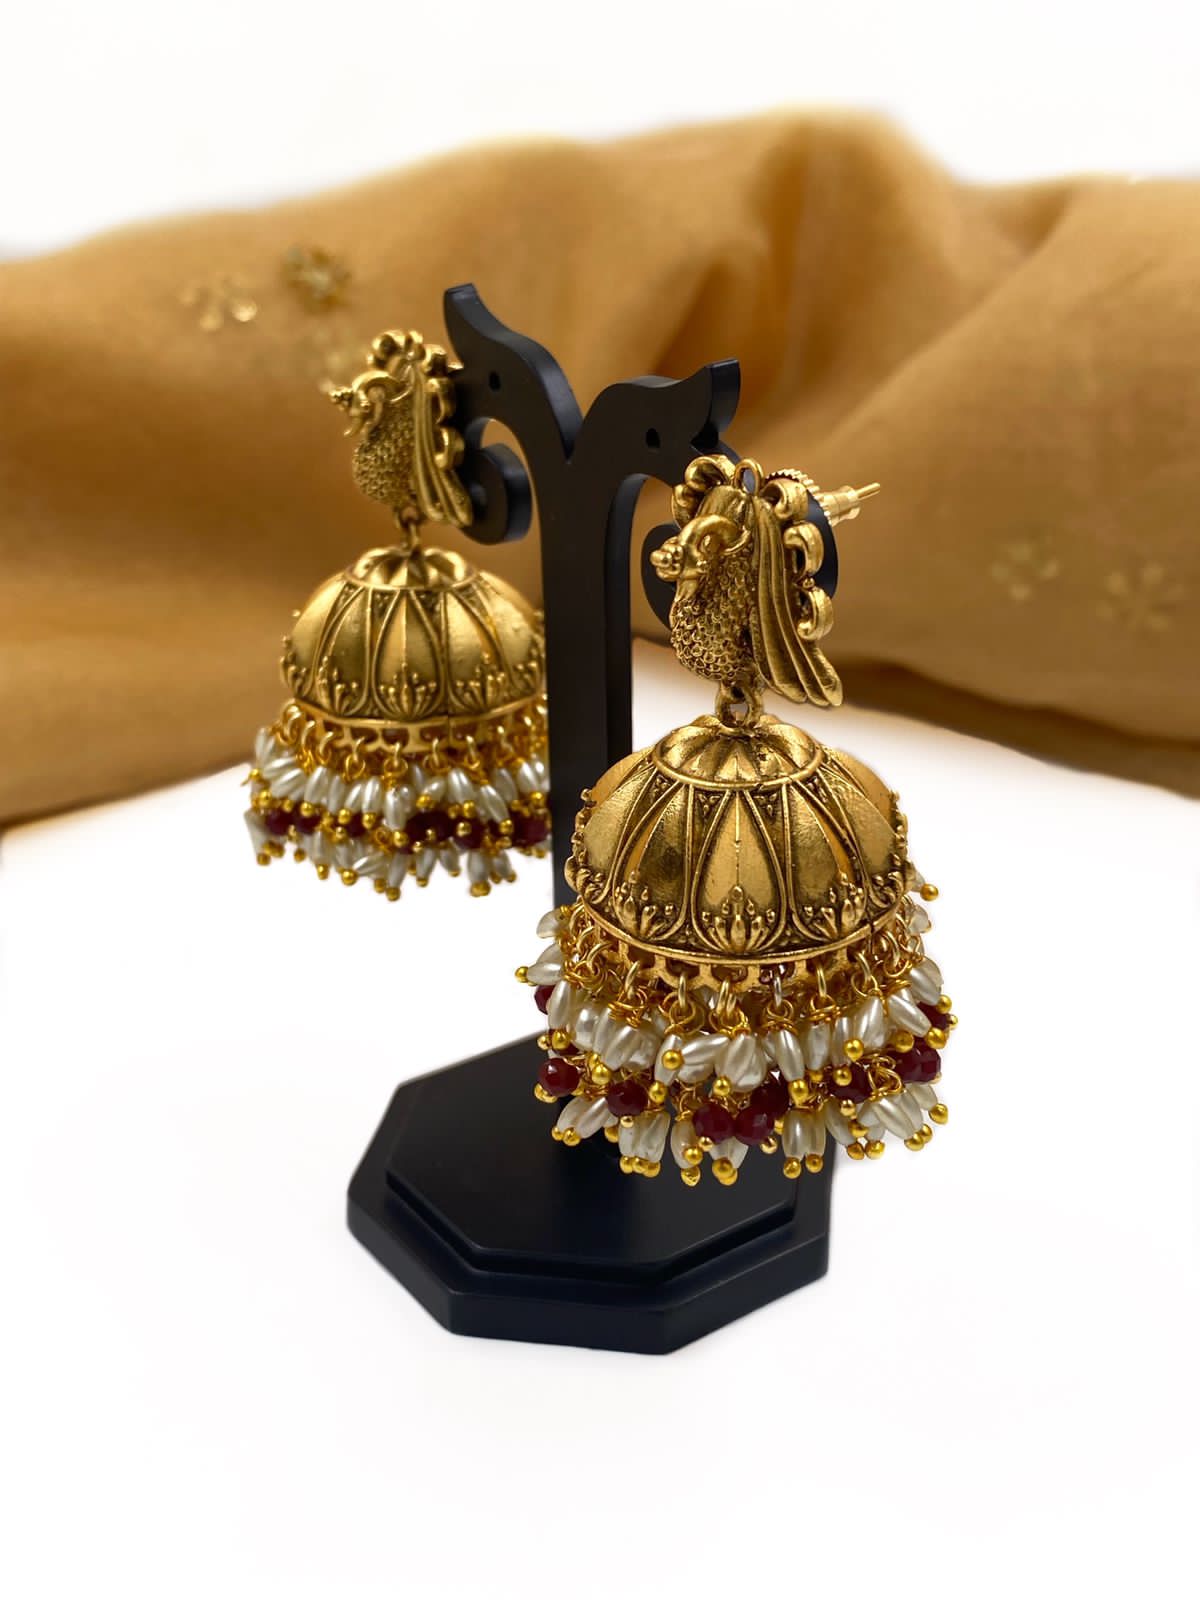 24 Designer Earrings to Shine In Wedding Season 2022 Giftalove Blog   Ideas Inspiration Latest trends to quick DIY and easy howtos